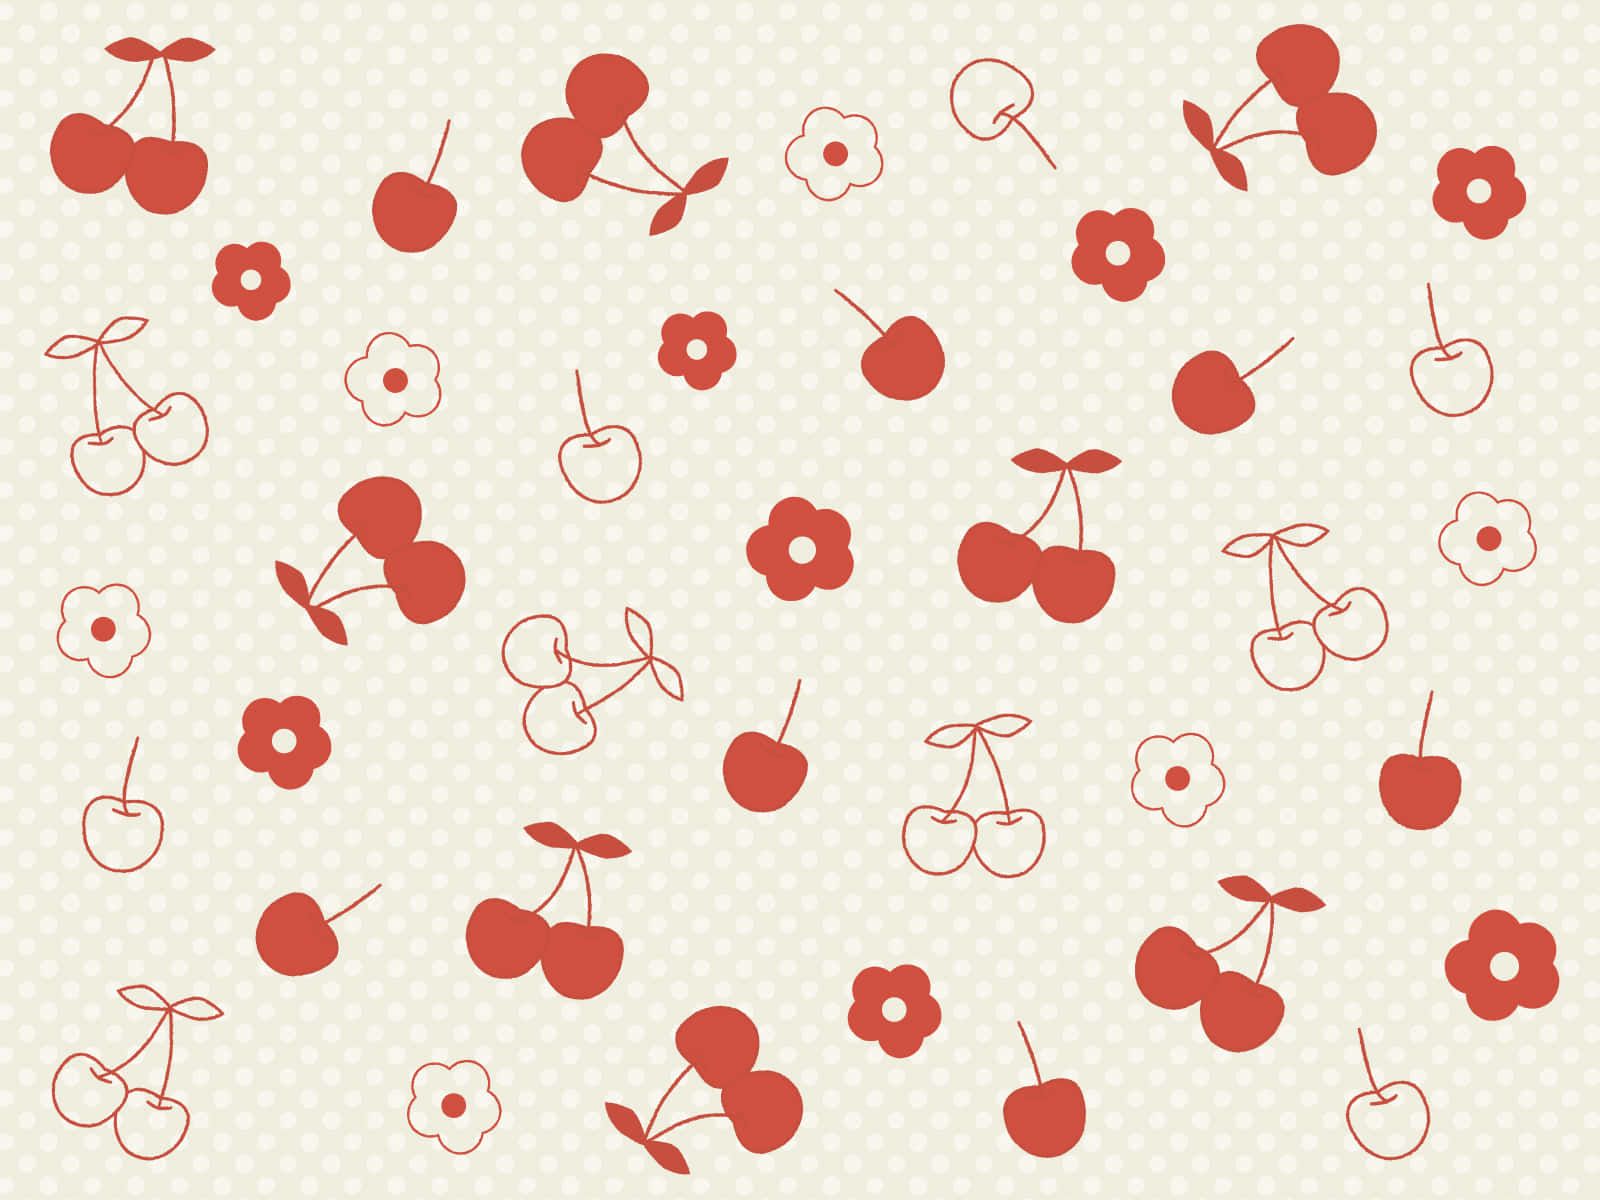 A pattern of red cherries and white flowers on a beige background - Cherry